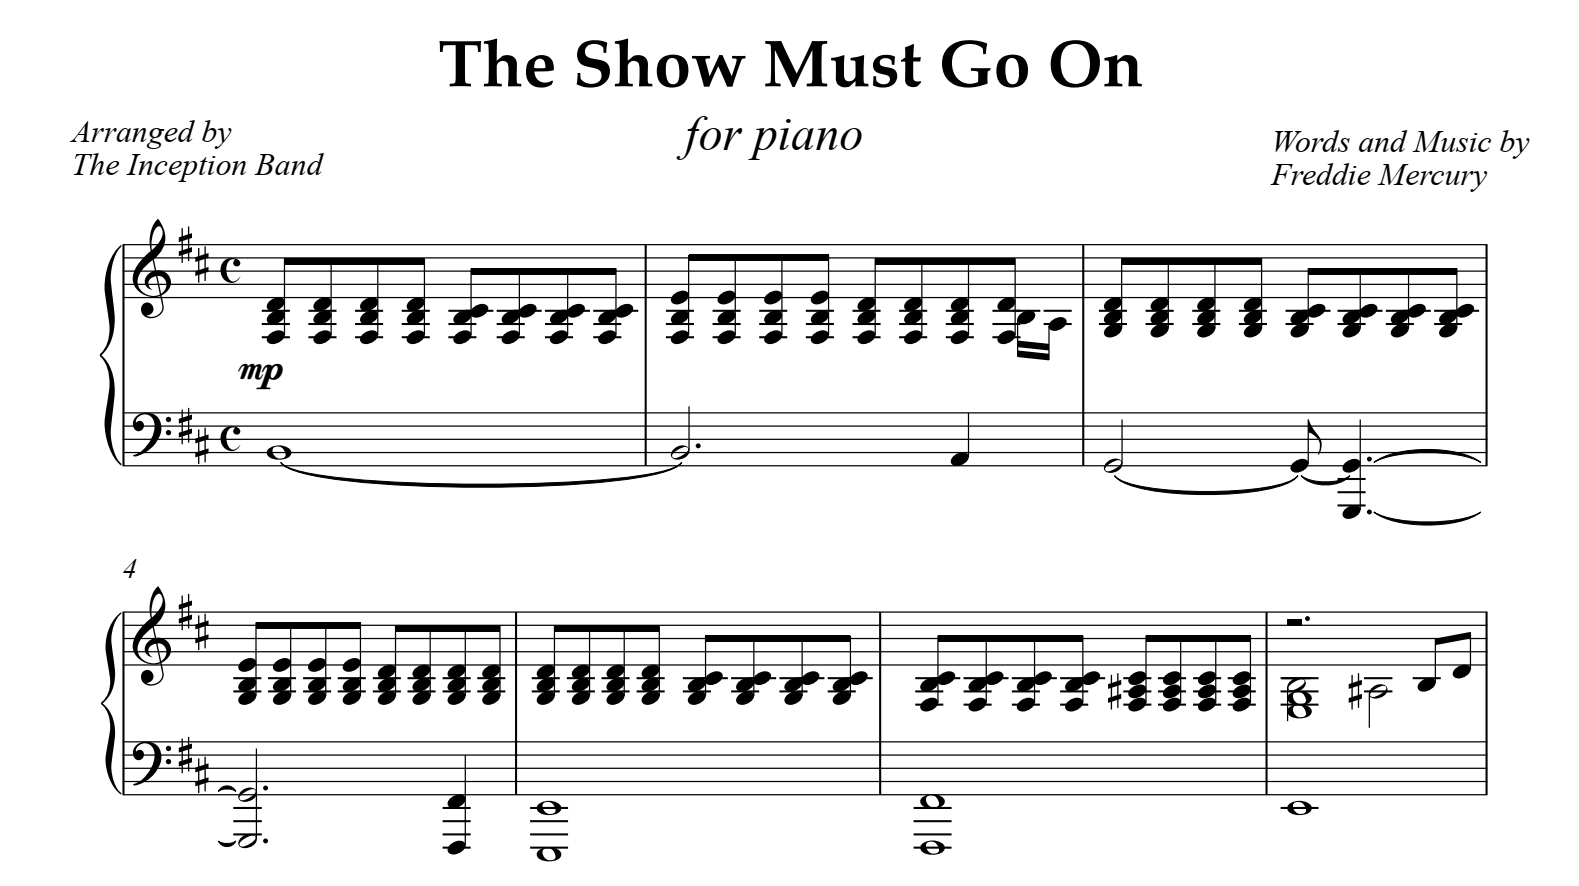 The Show Go On for piano. Sheet and midi files piano.